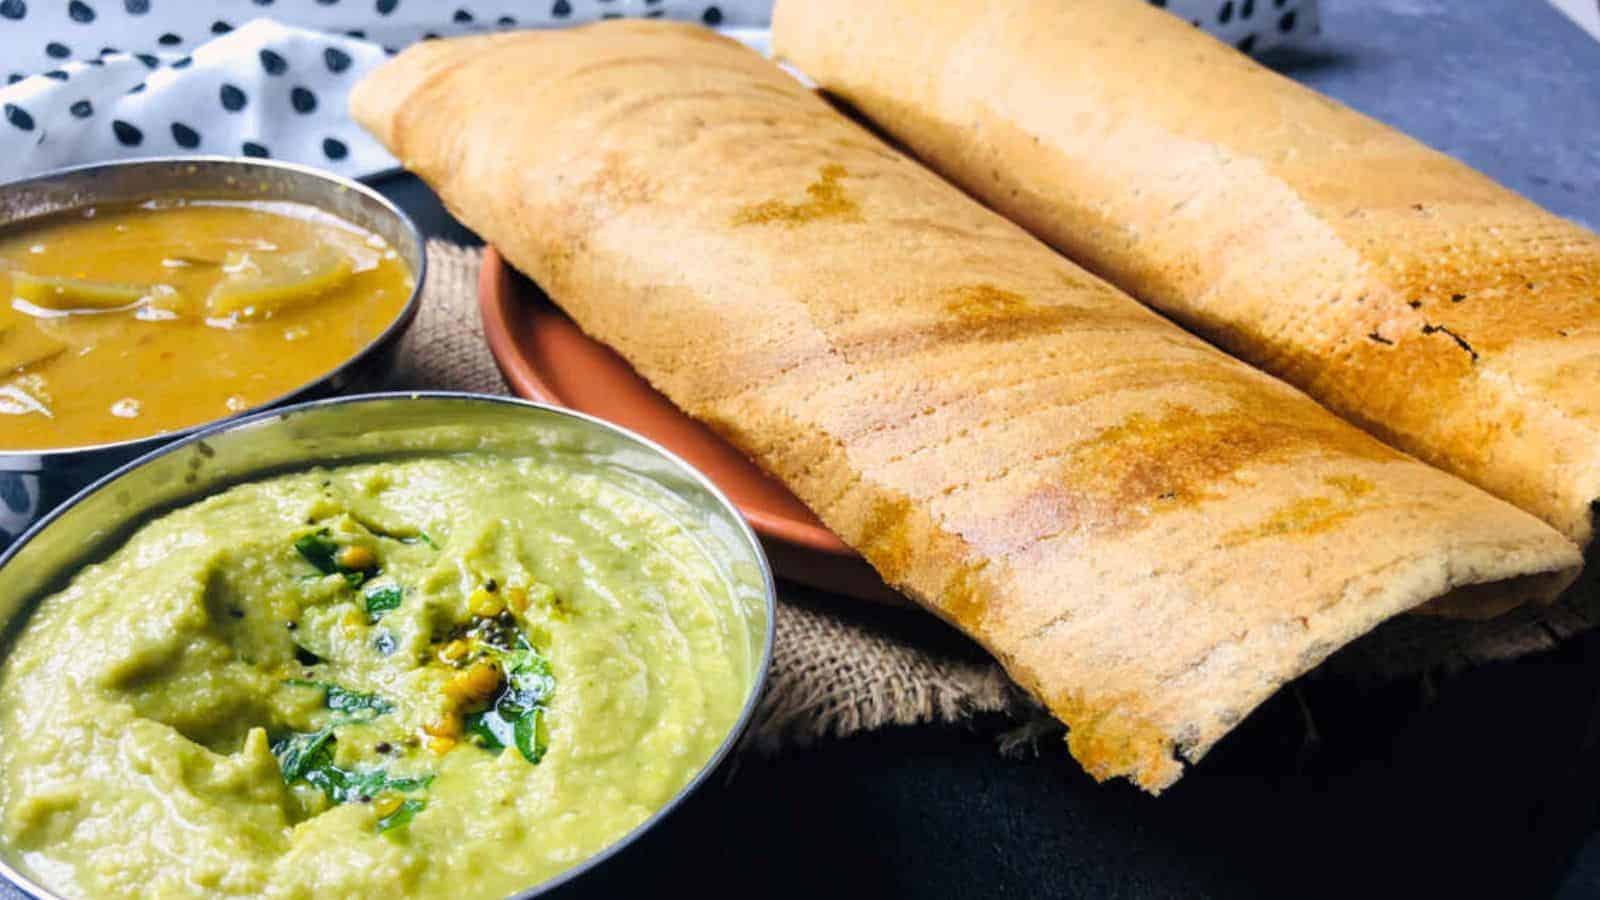 Two dosas served with coconut chutney and sambar in small bowls, placed on a rustic fabric surface.